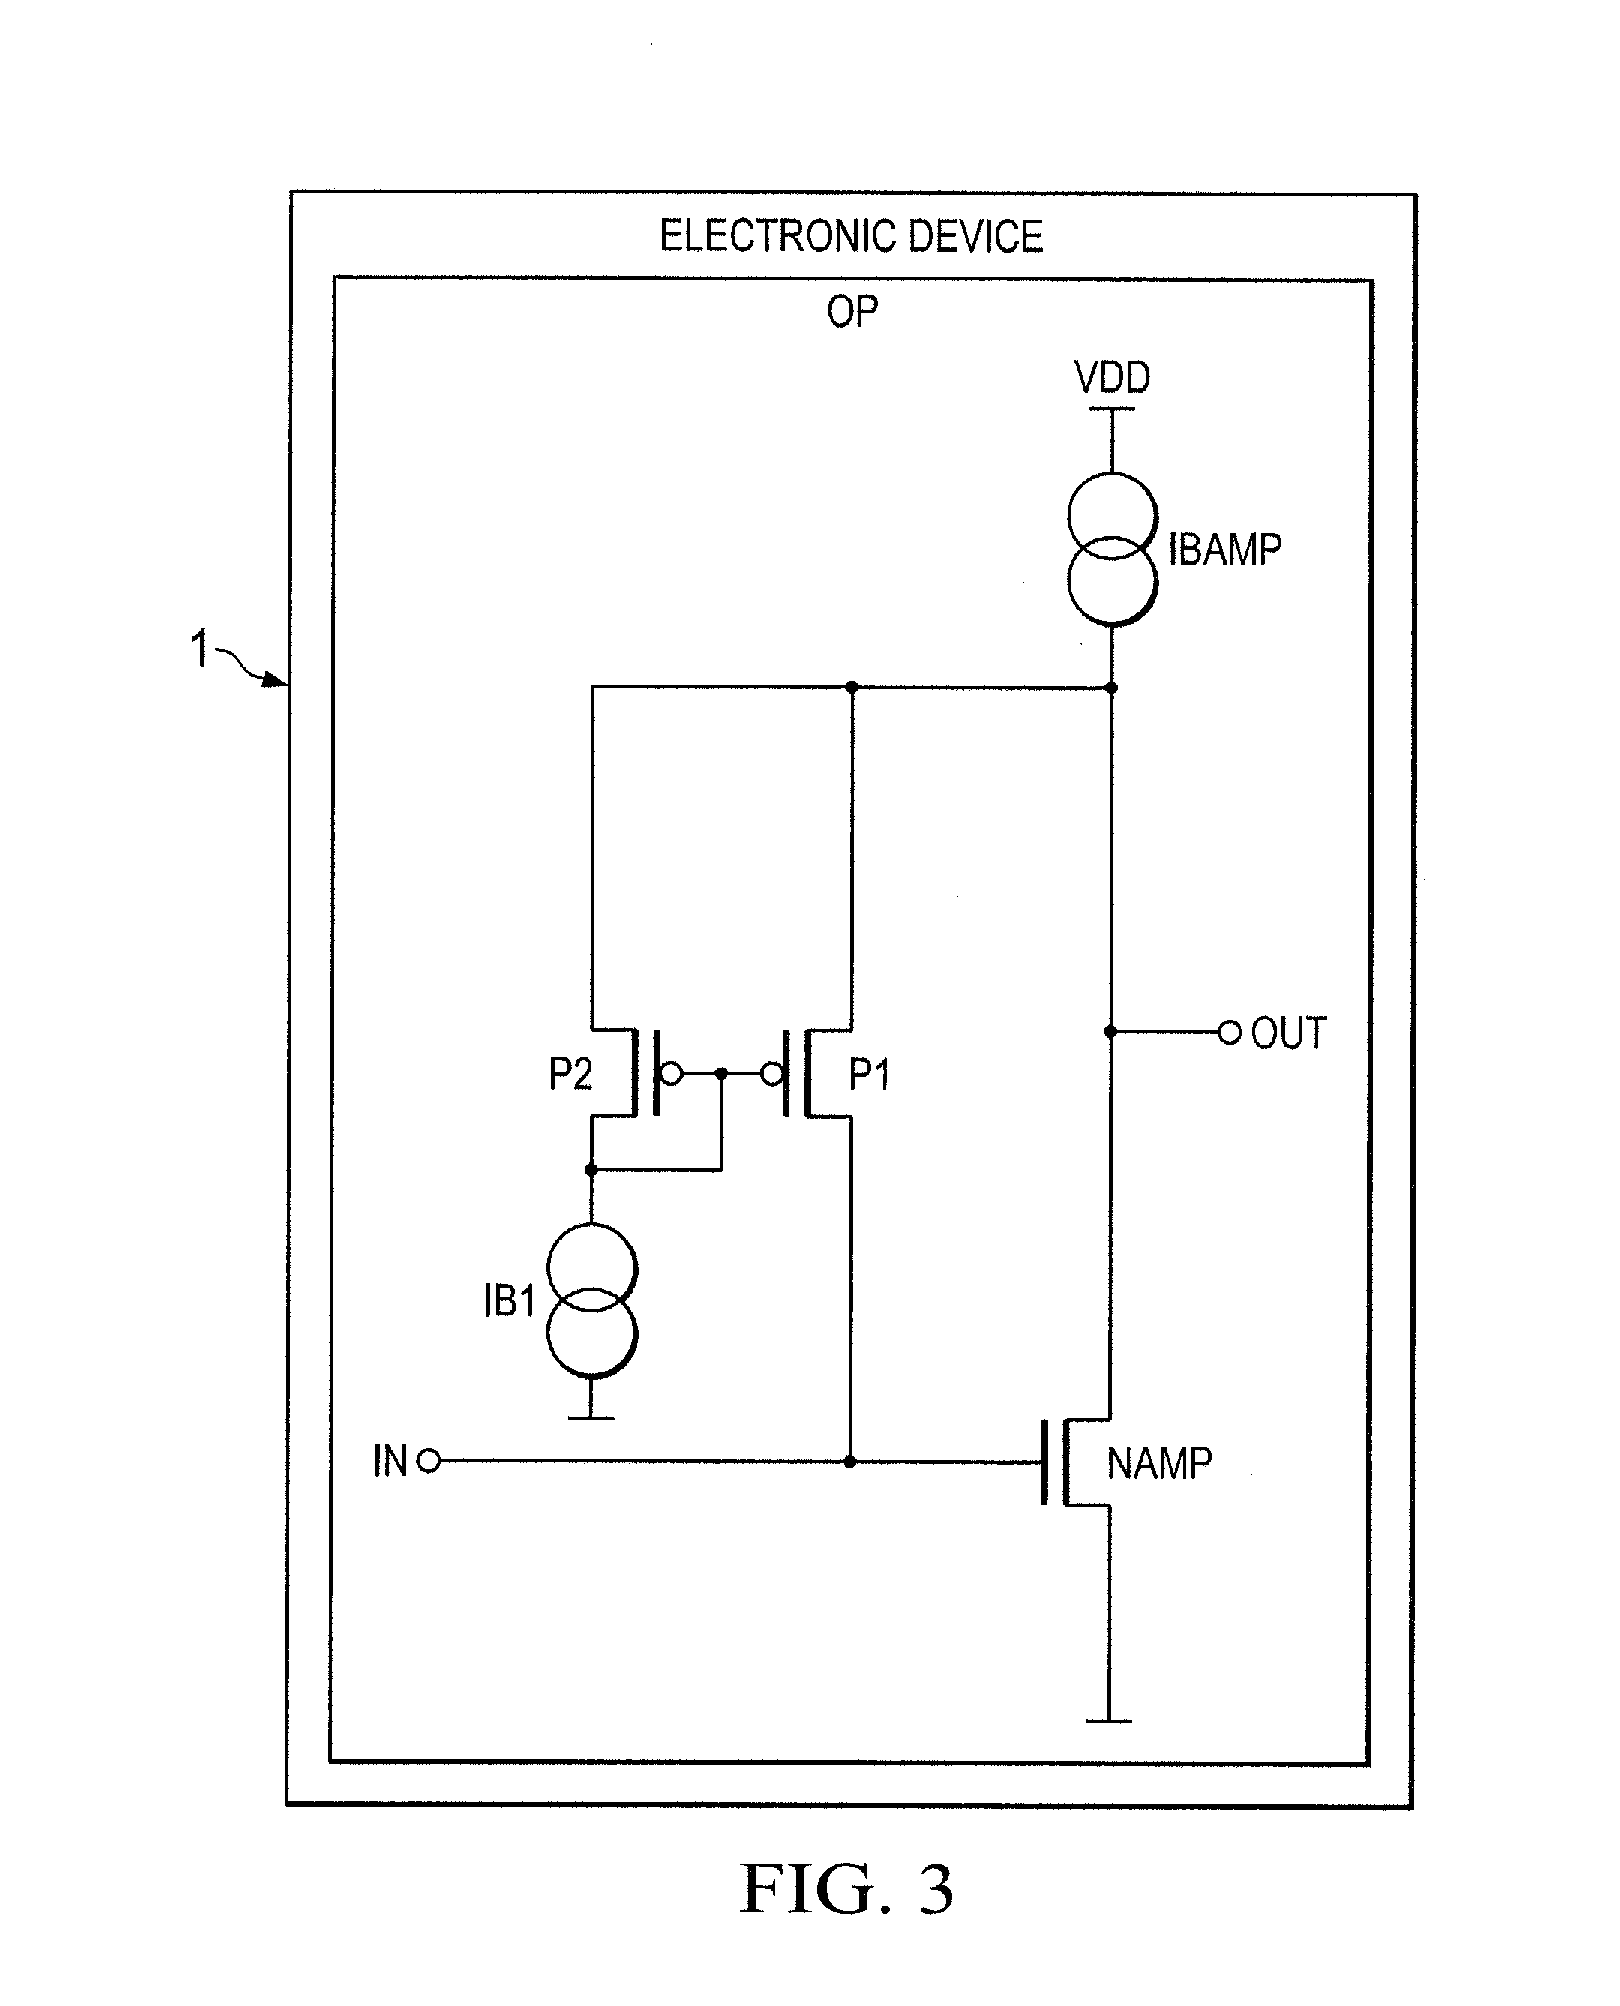 Electronic device and method for an amplifier with resistive feedback